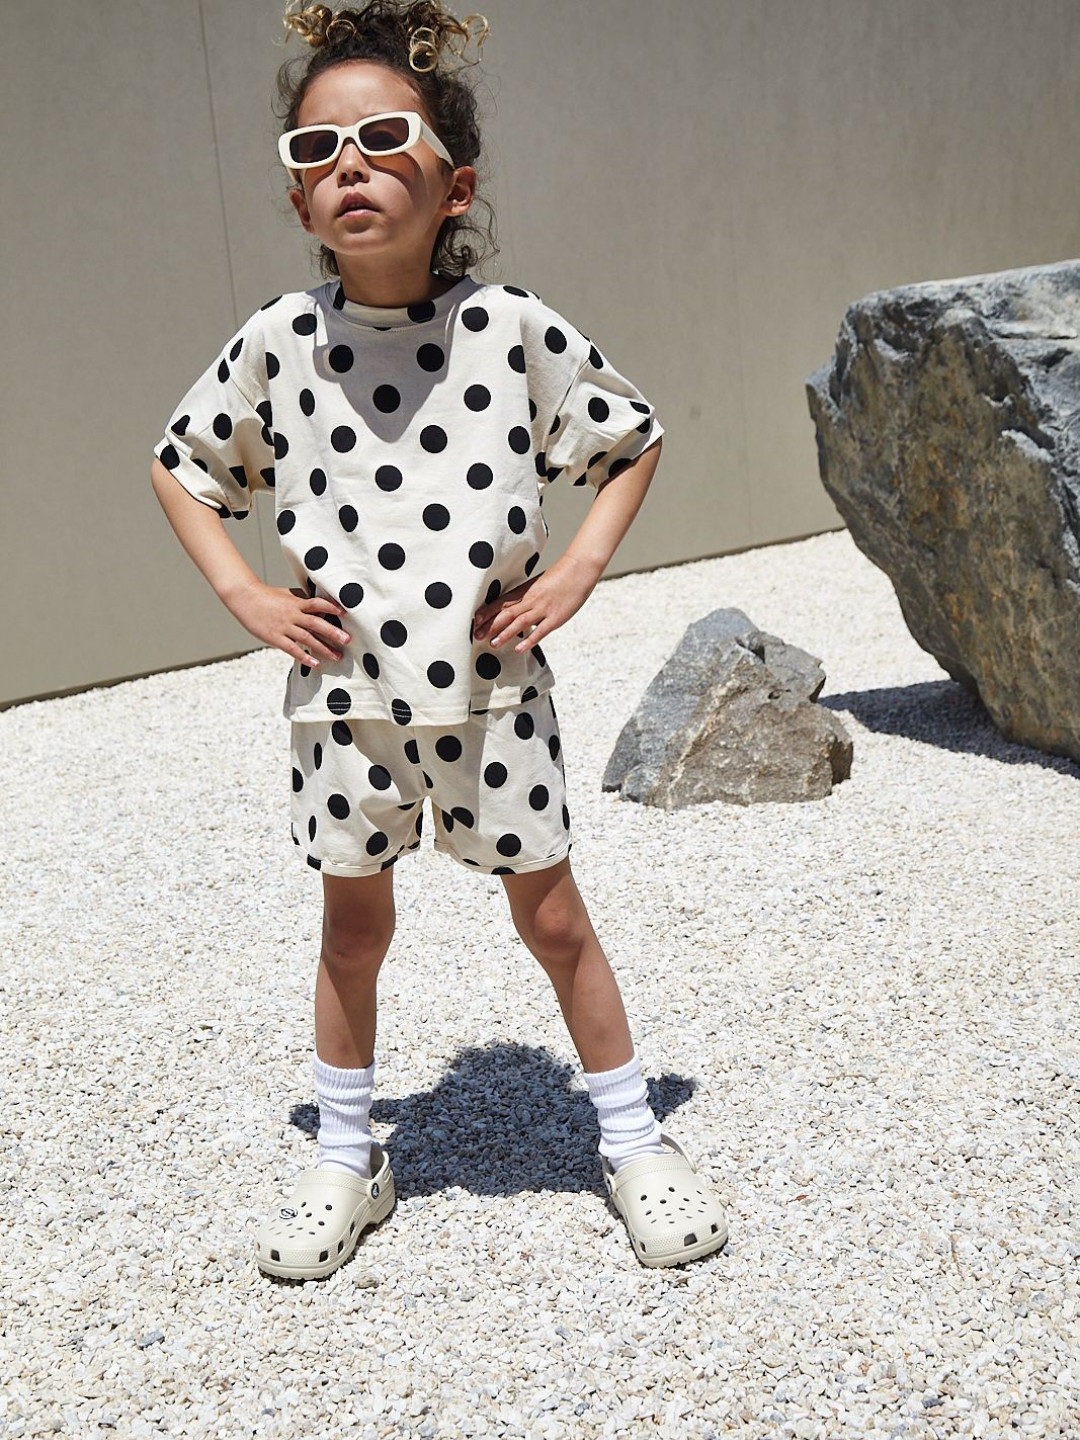  A child wearing a kids' tee shirt and shorts set in a pattern of black dots on an ecru background